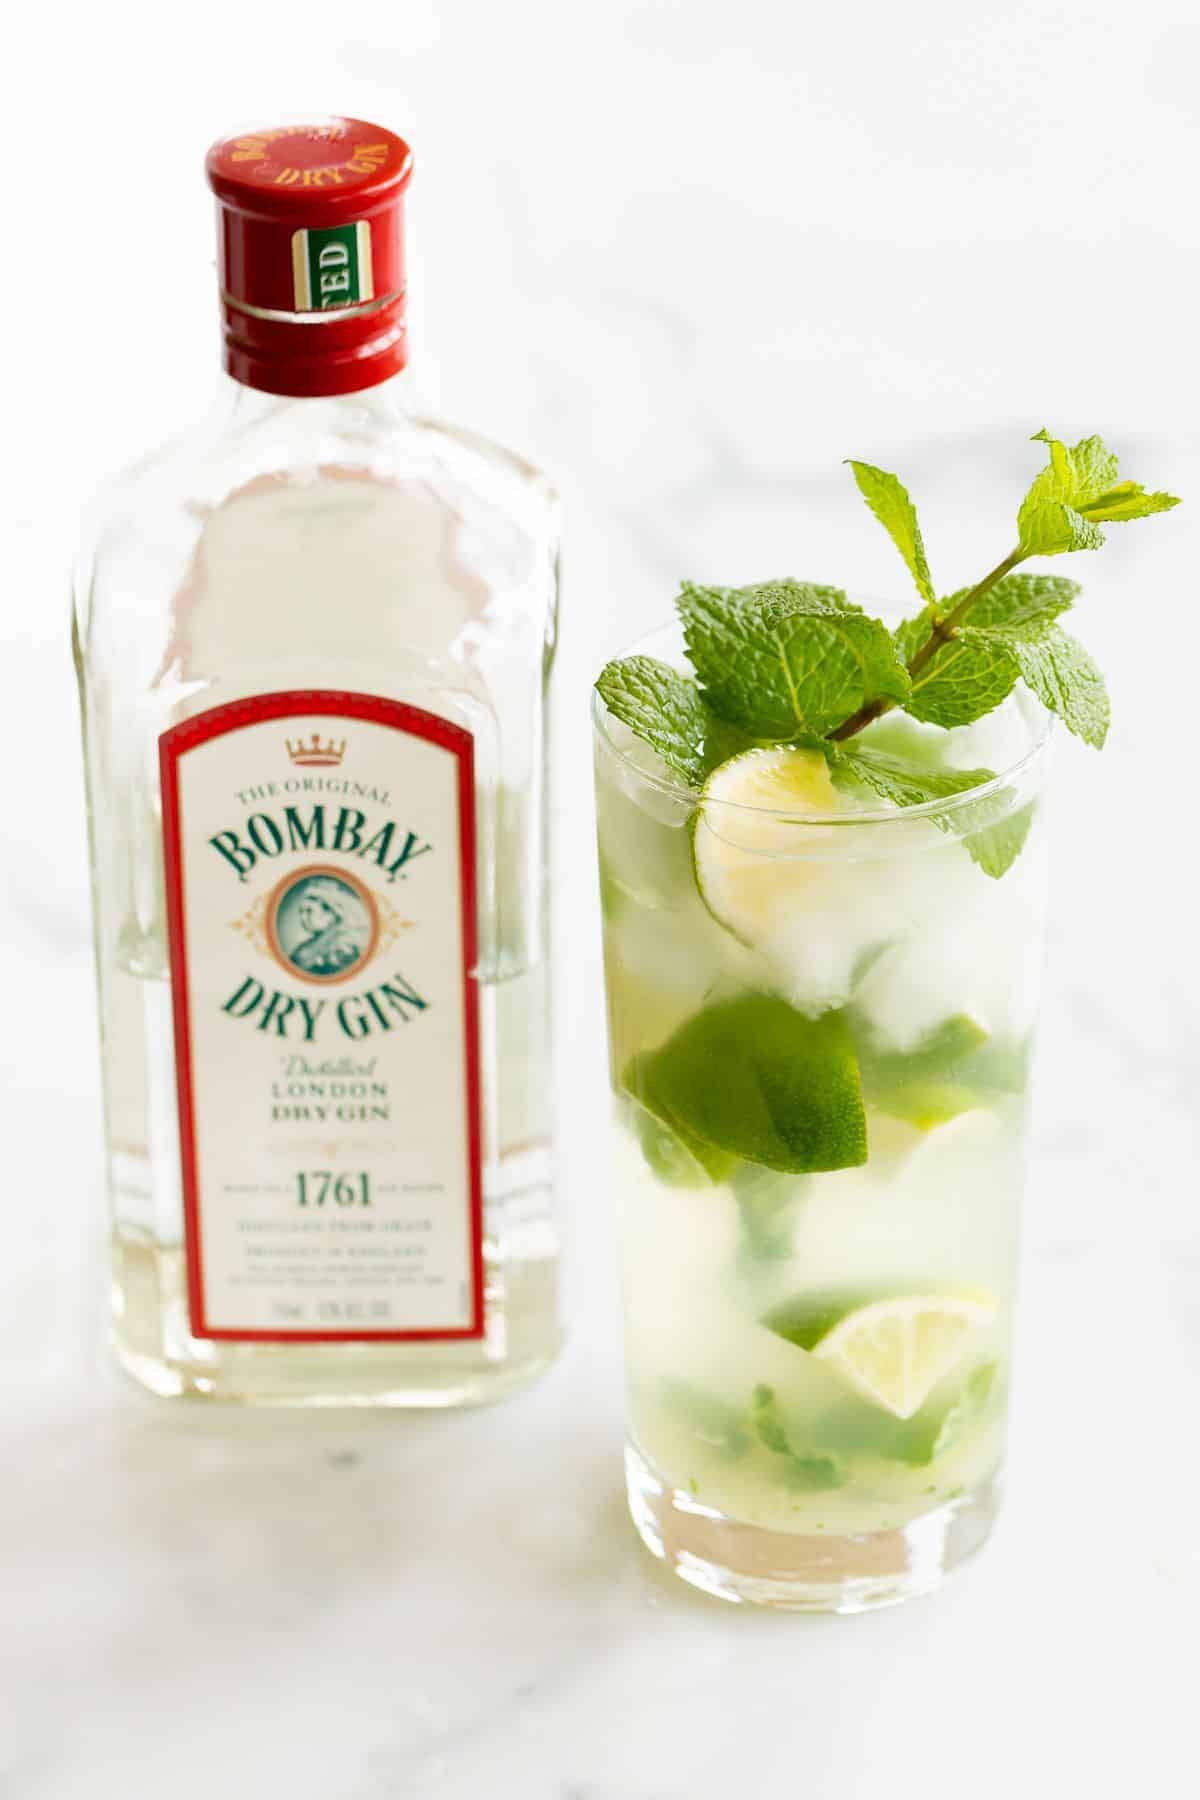 A gin mojito in a clear glass, garnished with a wedge of lime and a sprig of mint. Gin bottle in background.